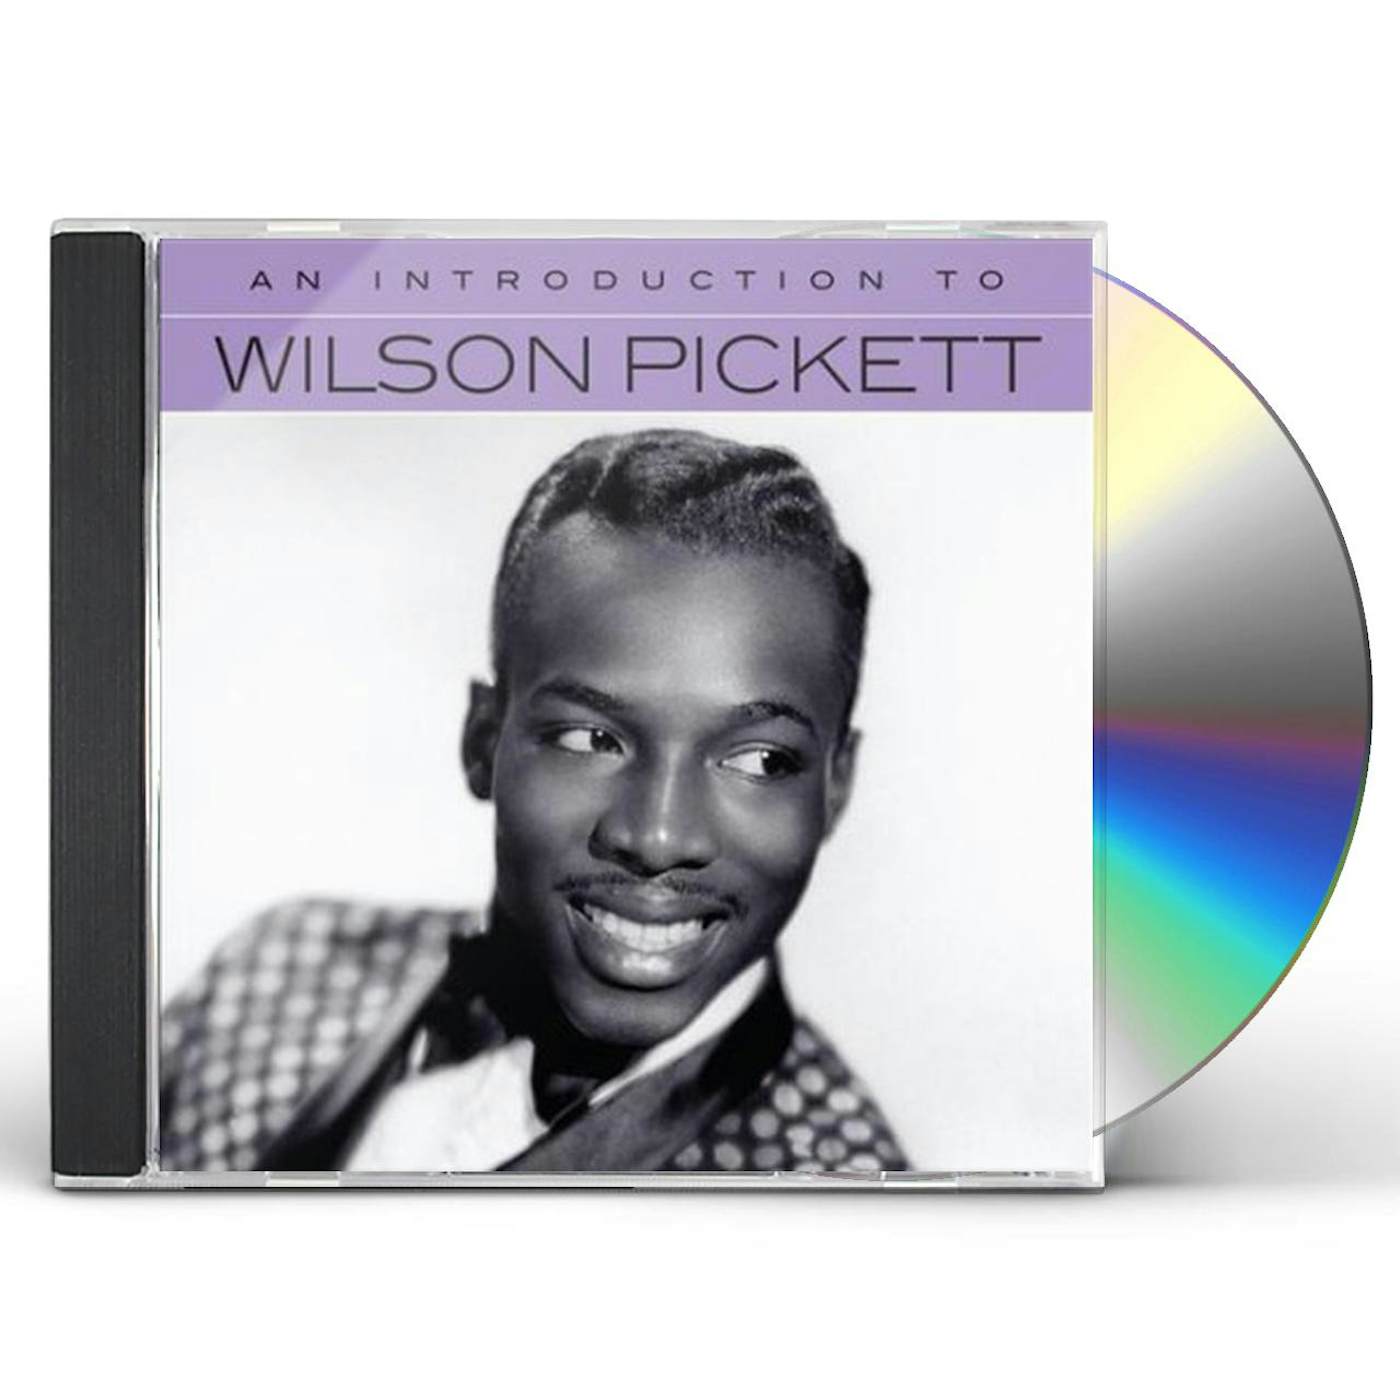 Wilson Pickett AN INTRODUCTION TO CD